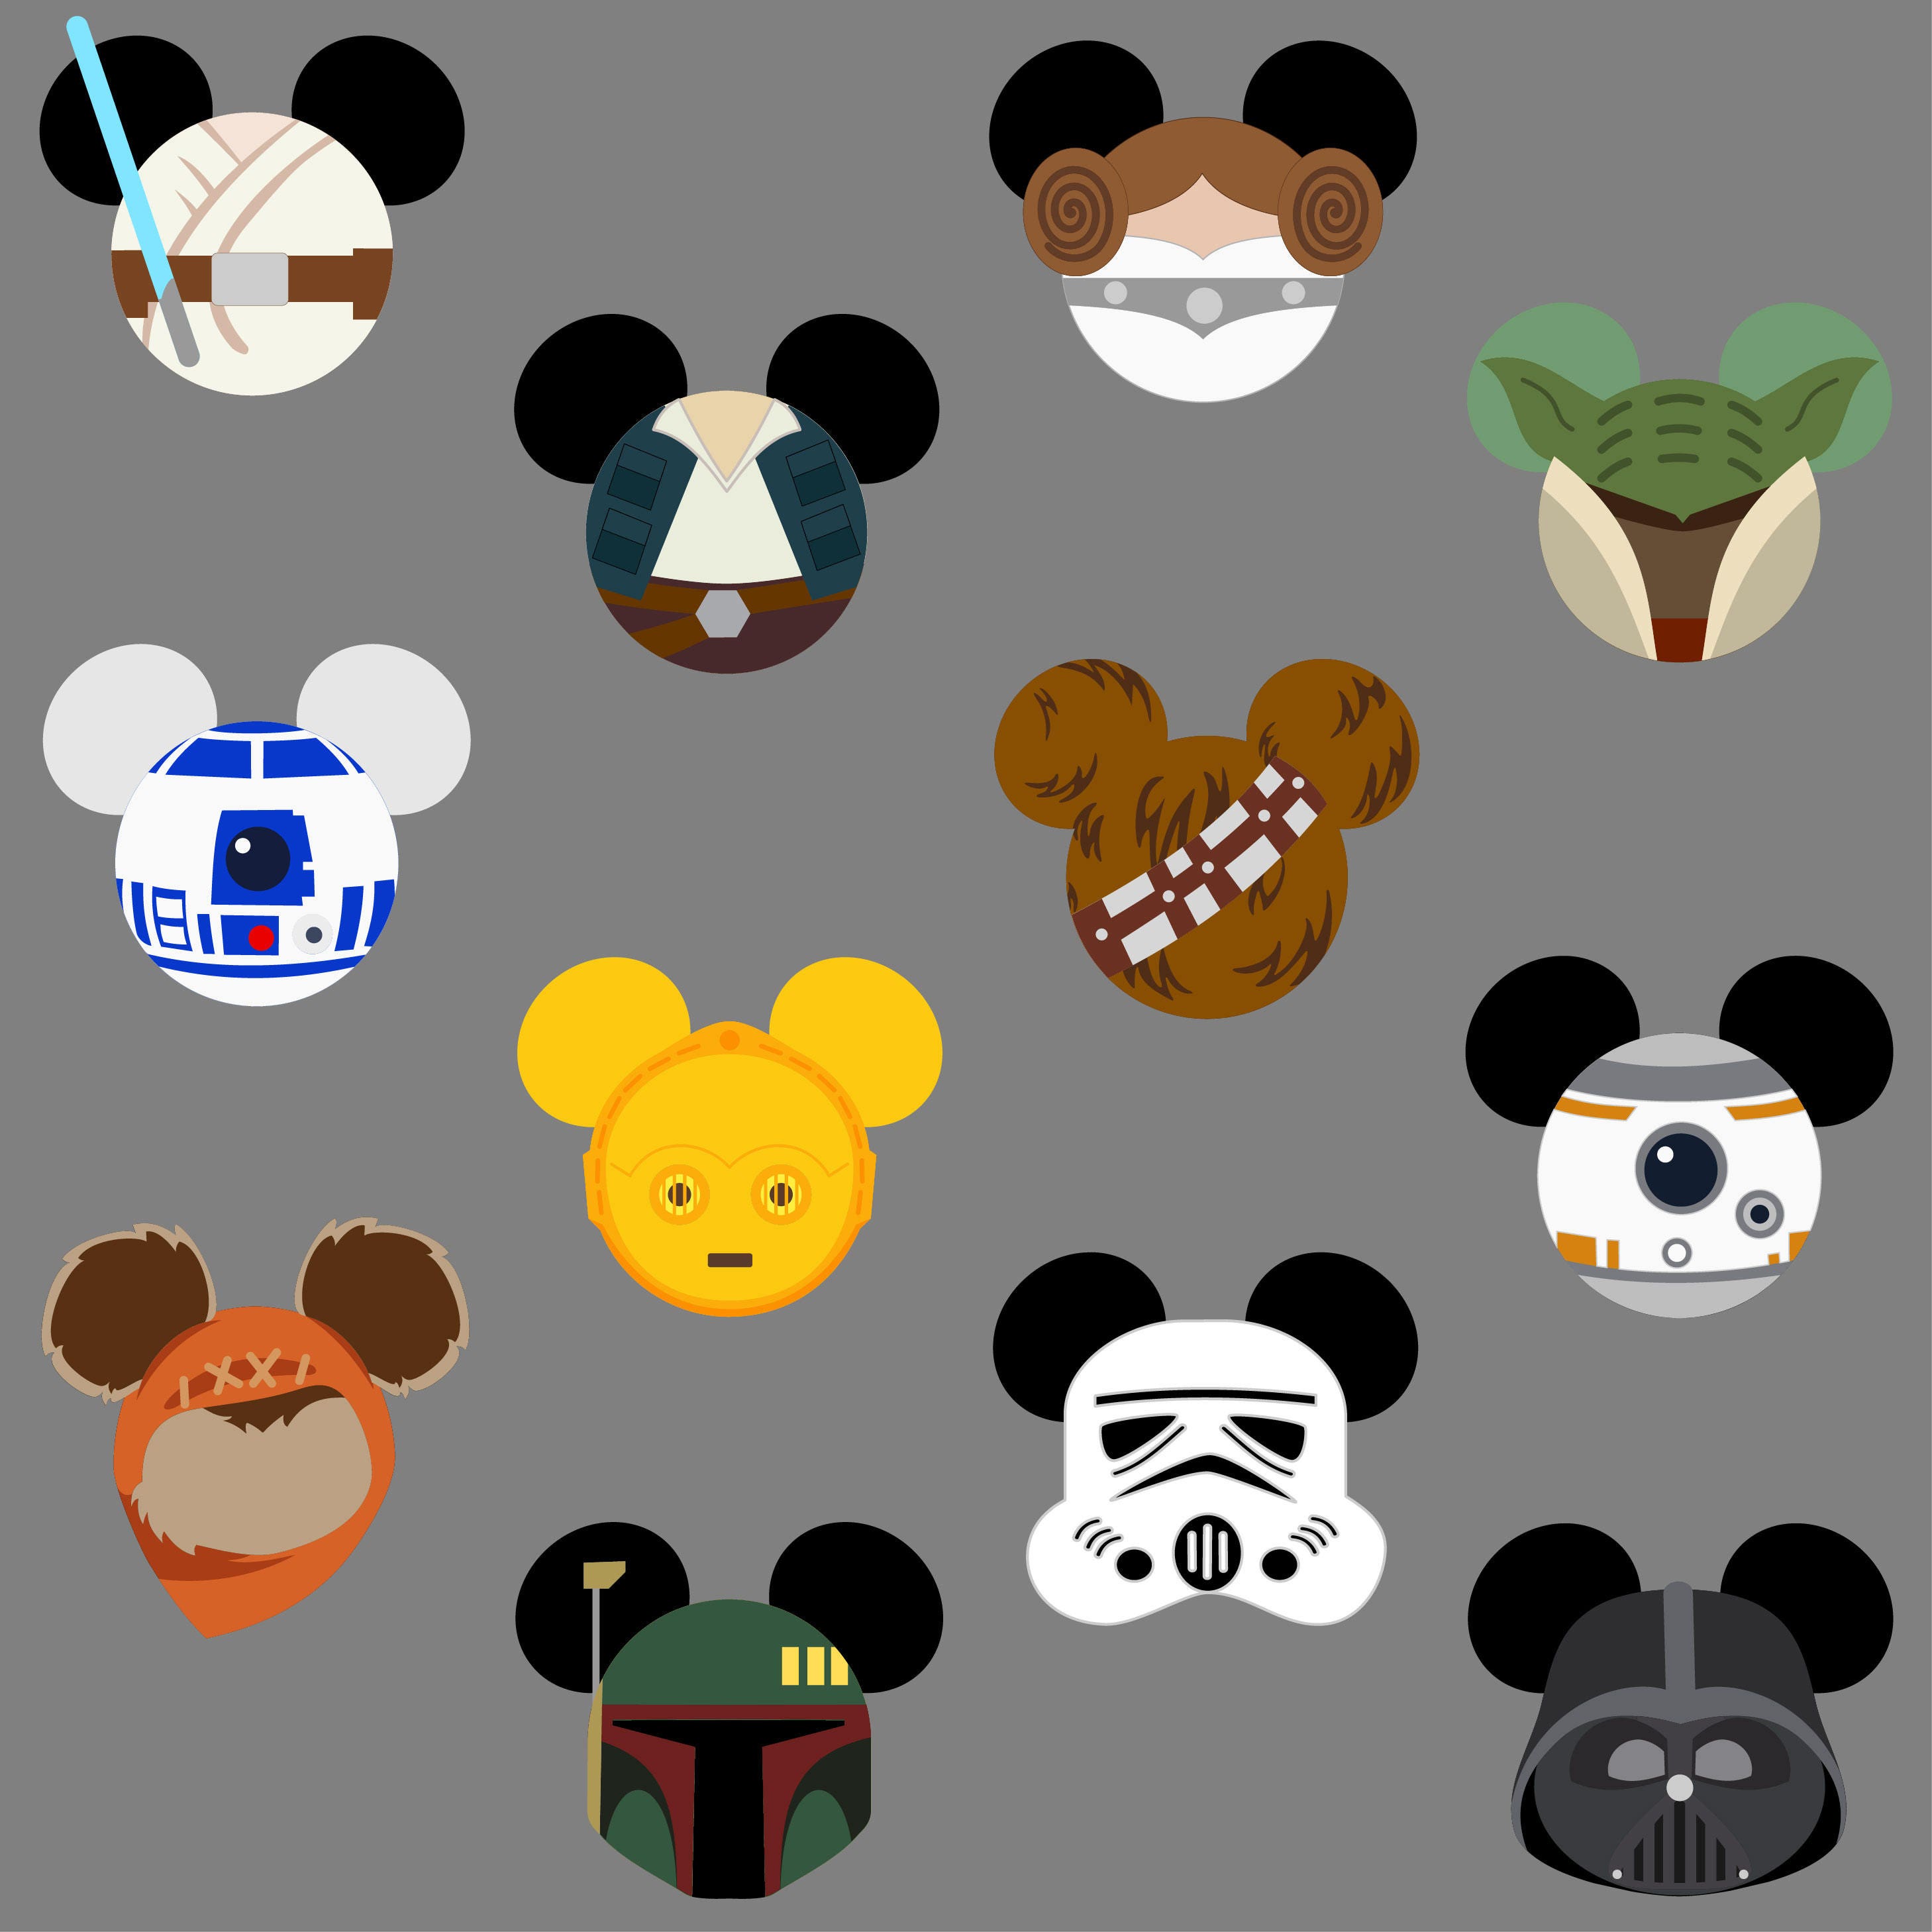 Download Star wars mickey head.Svg.Dfx.Eps.Pdf.Png. | Etsy